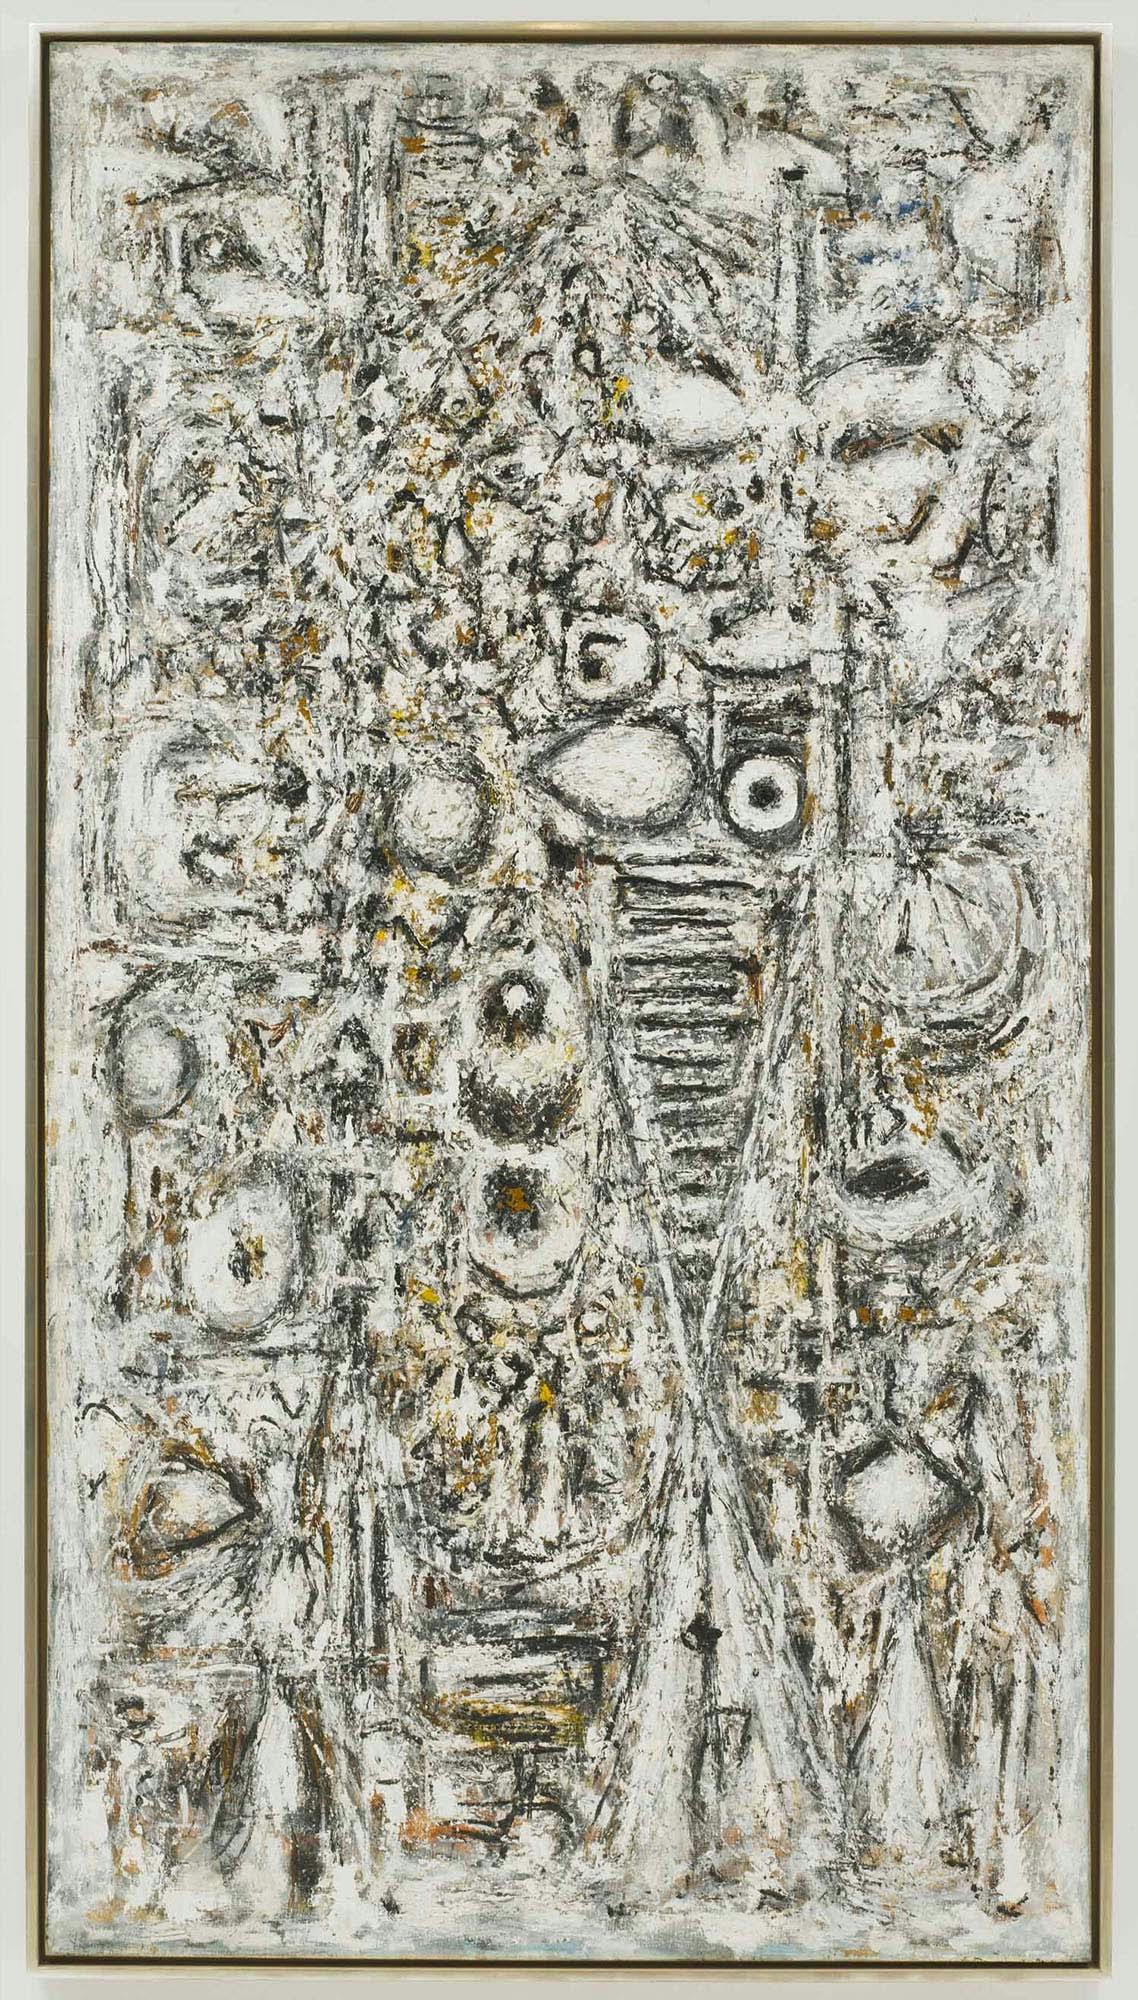 Shadow of the Unknown Bird [Illumination]
1955–58
Oil on linen
95 1/2 x 52 1/2 in. (242.6 x 133.4 cm)
Colby College Museum of Art, Waterville, Maine
 – The Richard Pousette-Dart Foundation